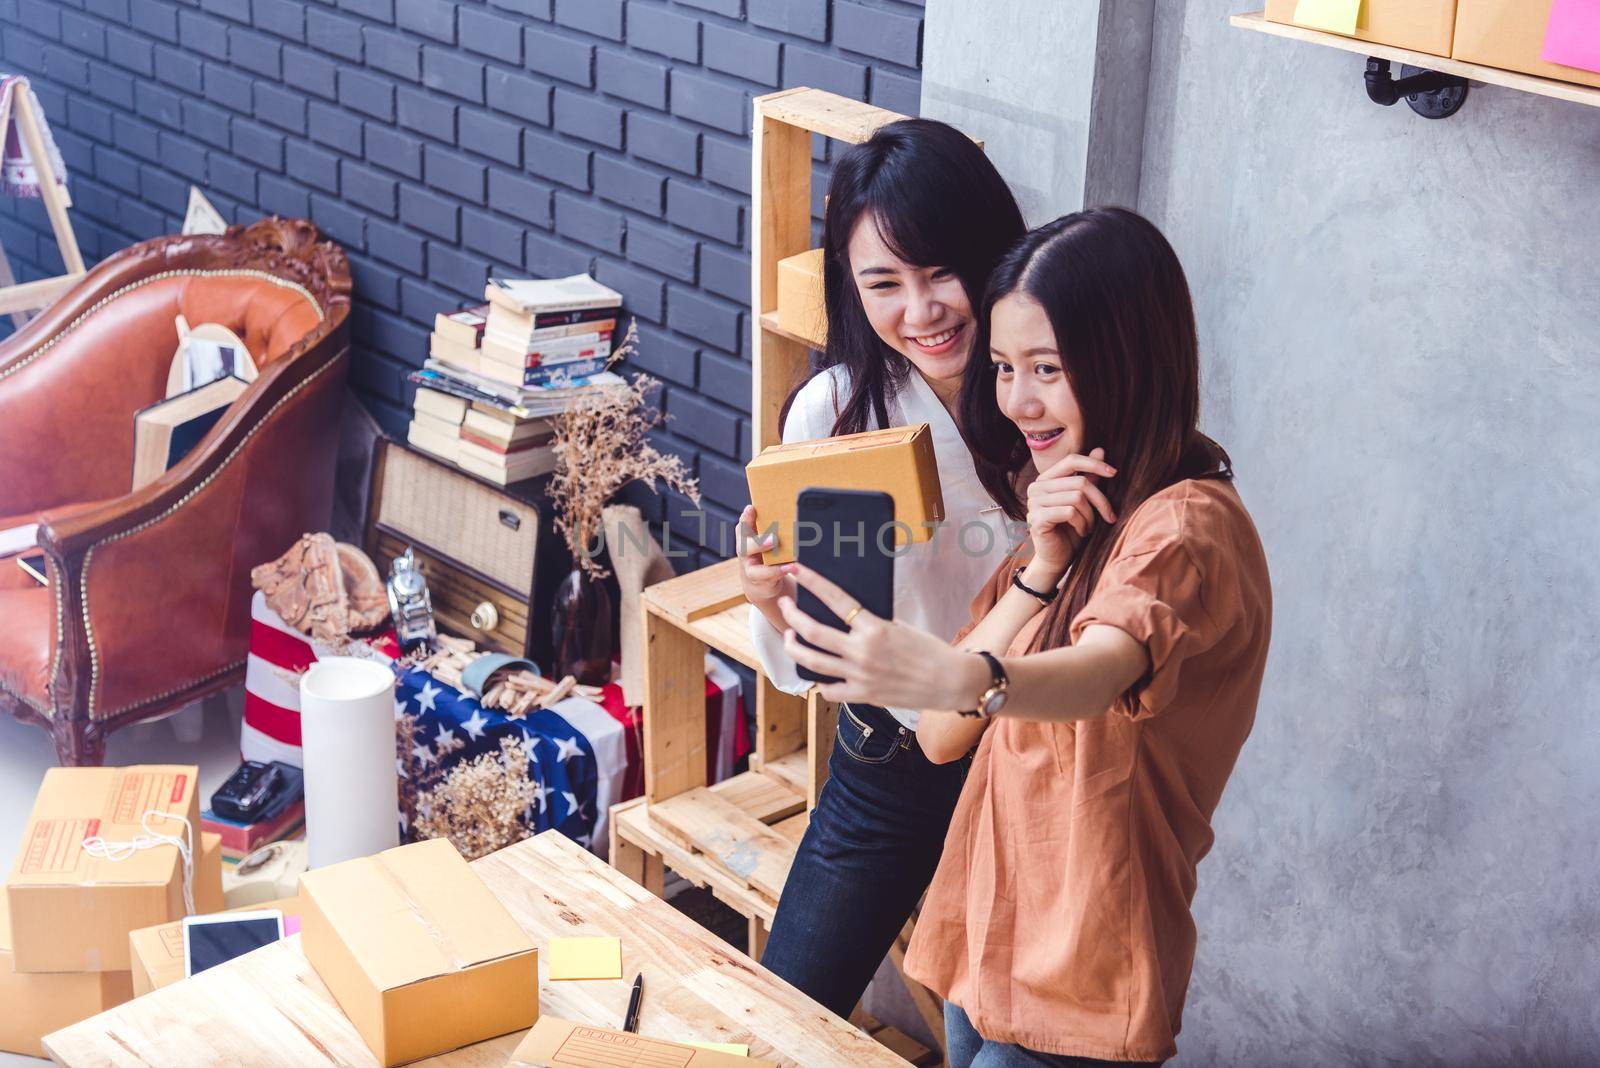 Two women took a selfie by mobile phone while selling online together. Business and people lifestyles concept. Thai girls take a photo while online shopping.